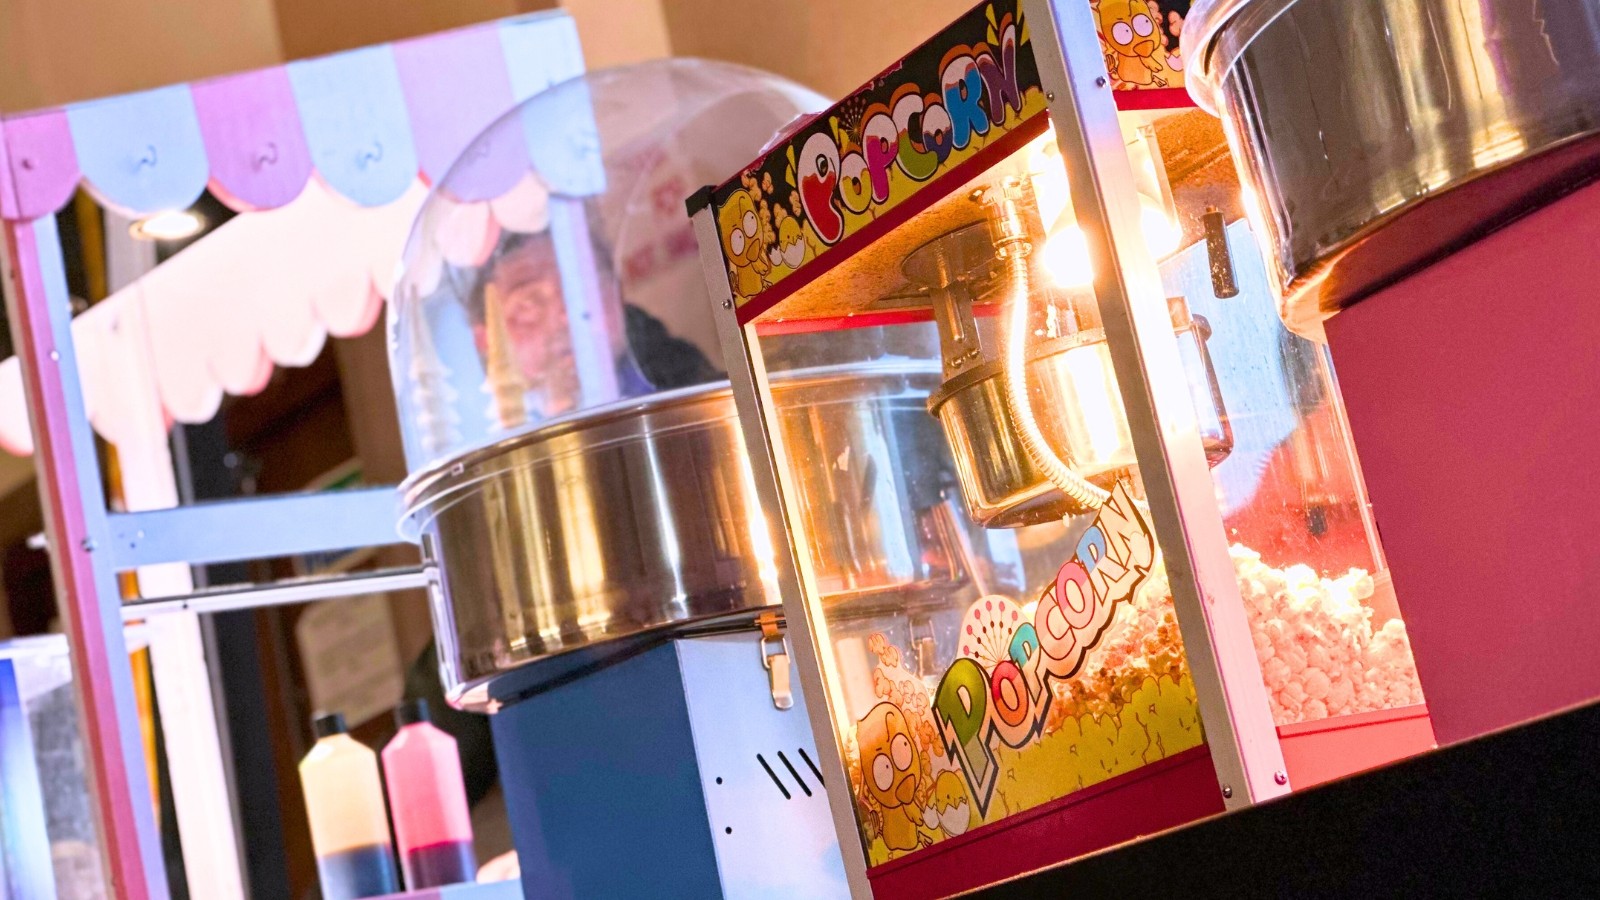 Popcorn & Candy Floss Hire